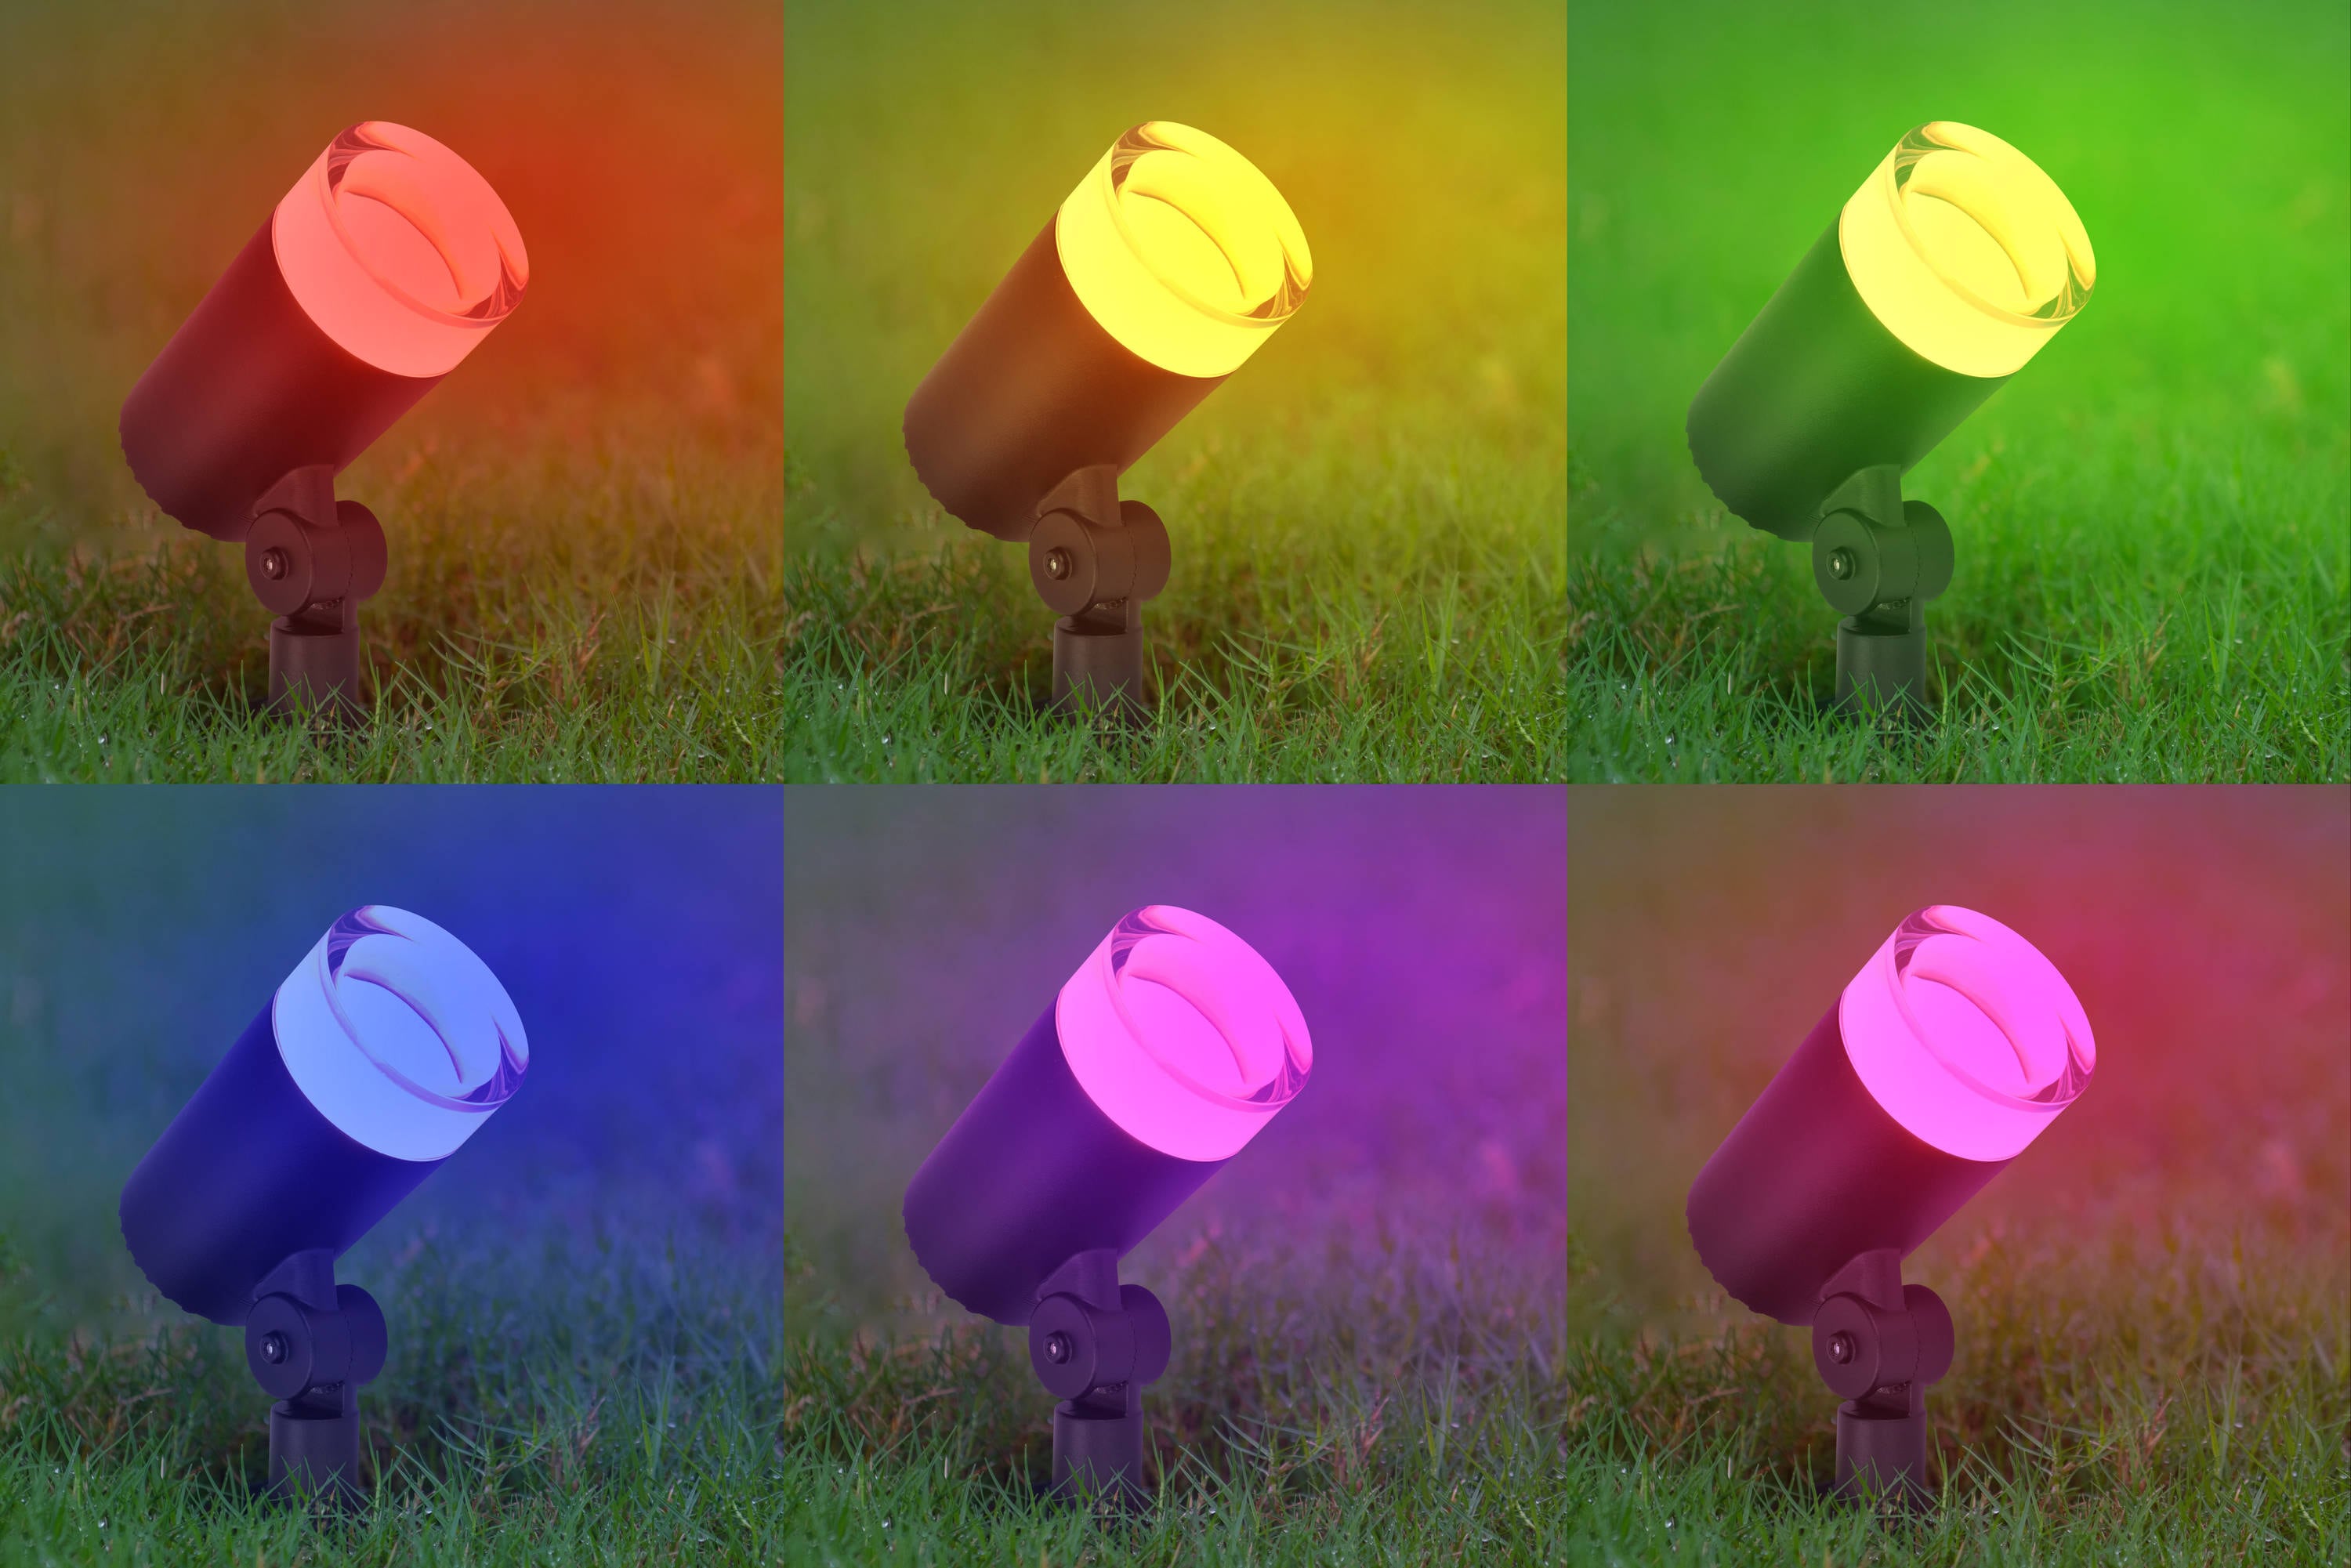 Philips Hue White and Color Ambiance Lily Outdoor Spot Light Kit Review